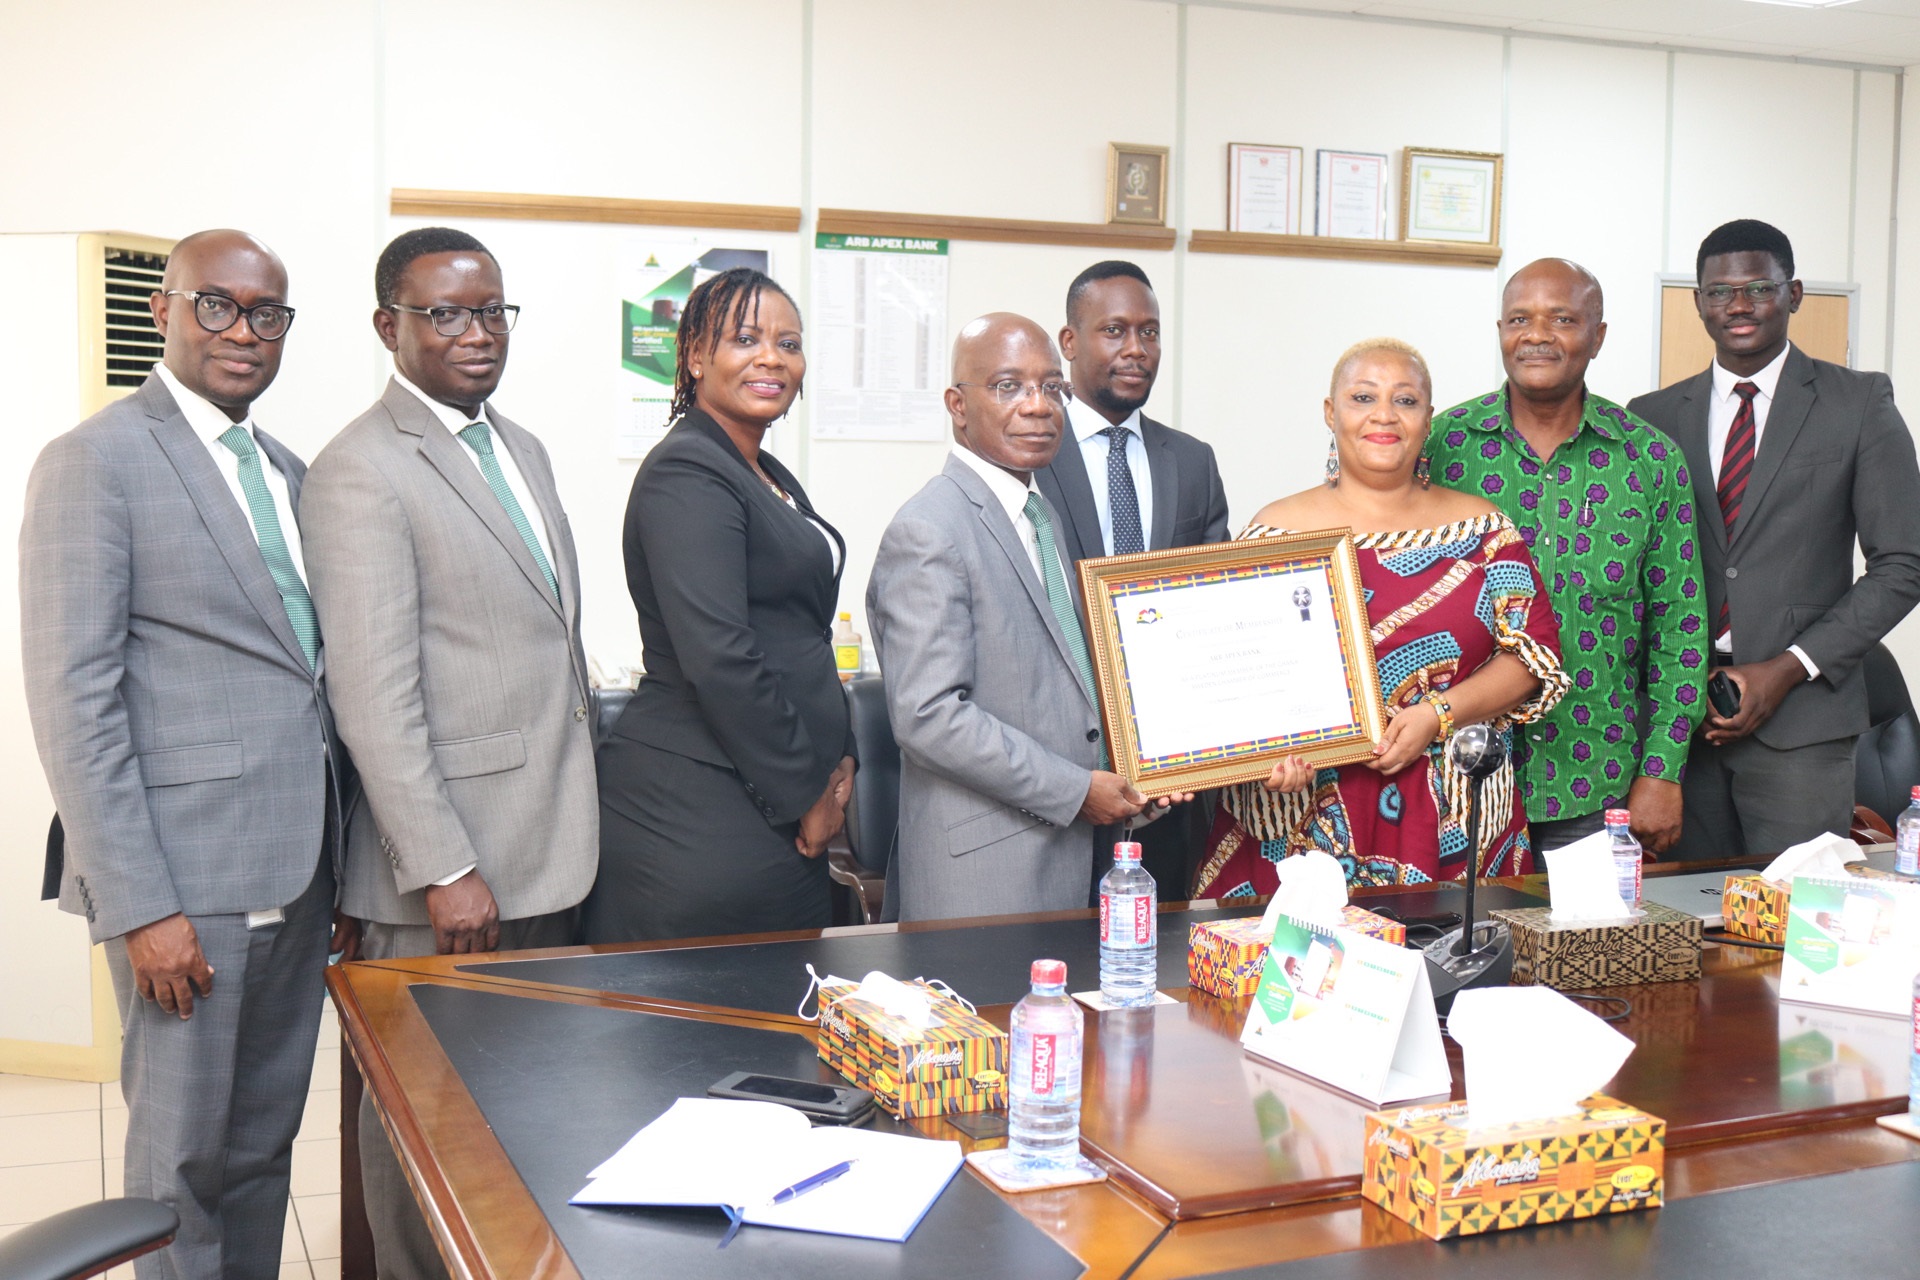 Kojo Mattah, Managing Director of ARB Apex Bank receiving the certificate from Pearl Delali Doledzi, while Isaac Vanderpuije, Founder of the Chamber (2nd from right) and Oswald Anonadaga, CEO of Floodgate Limited (extreme right)